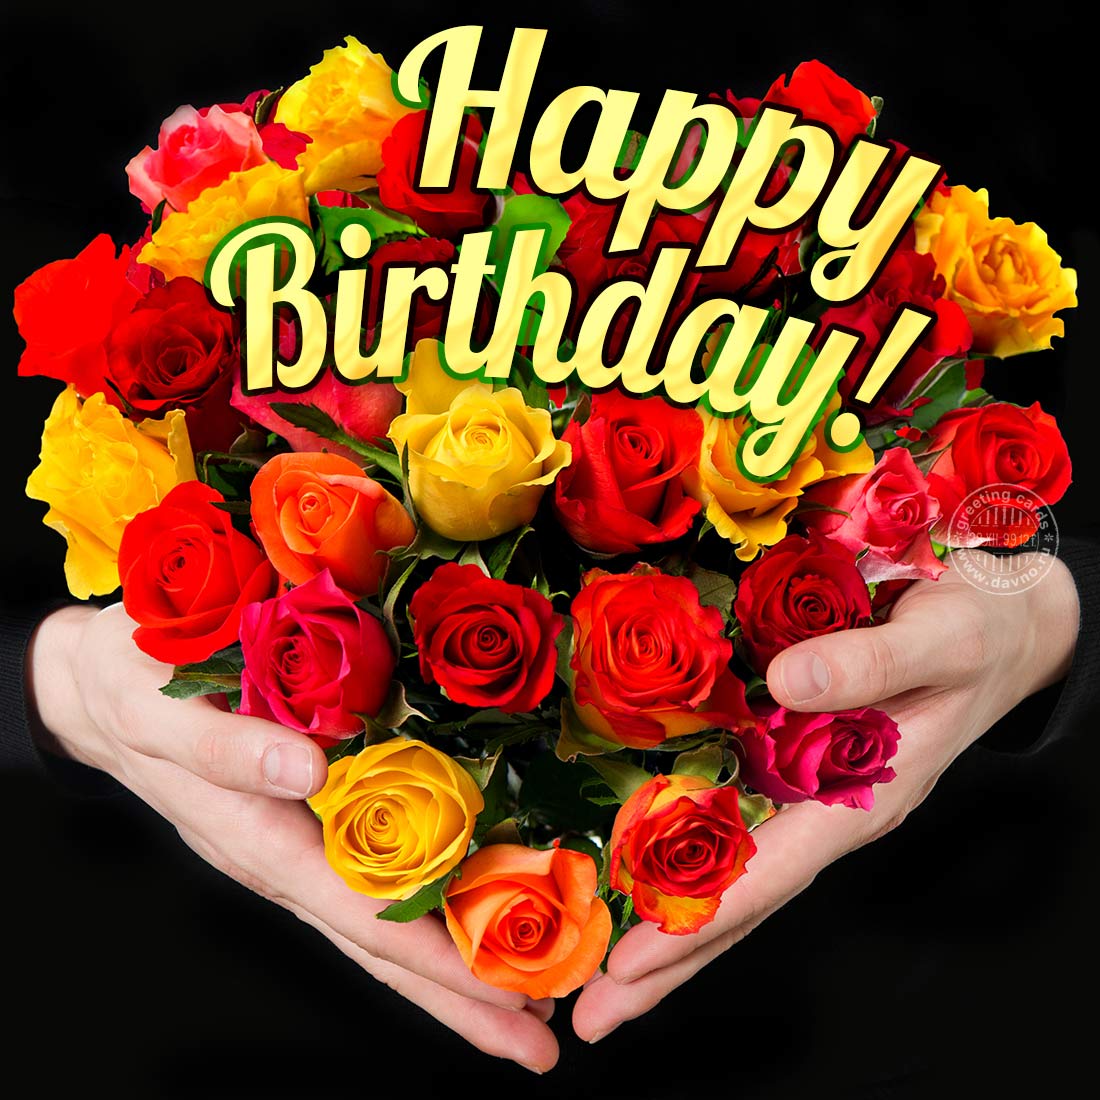 birthday-card-with-roses-download-on-davno